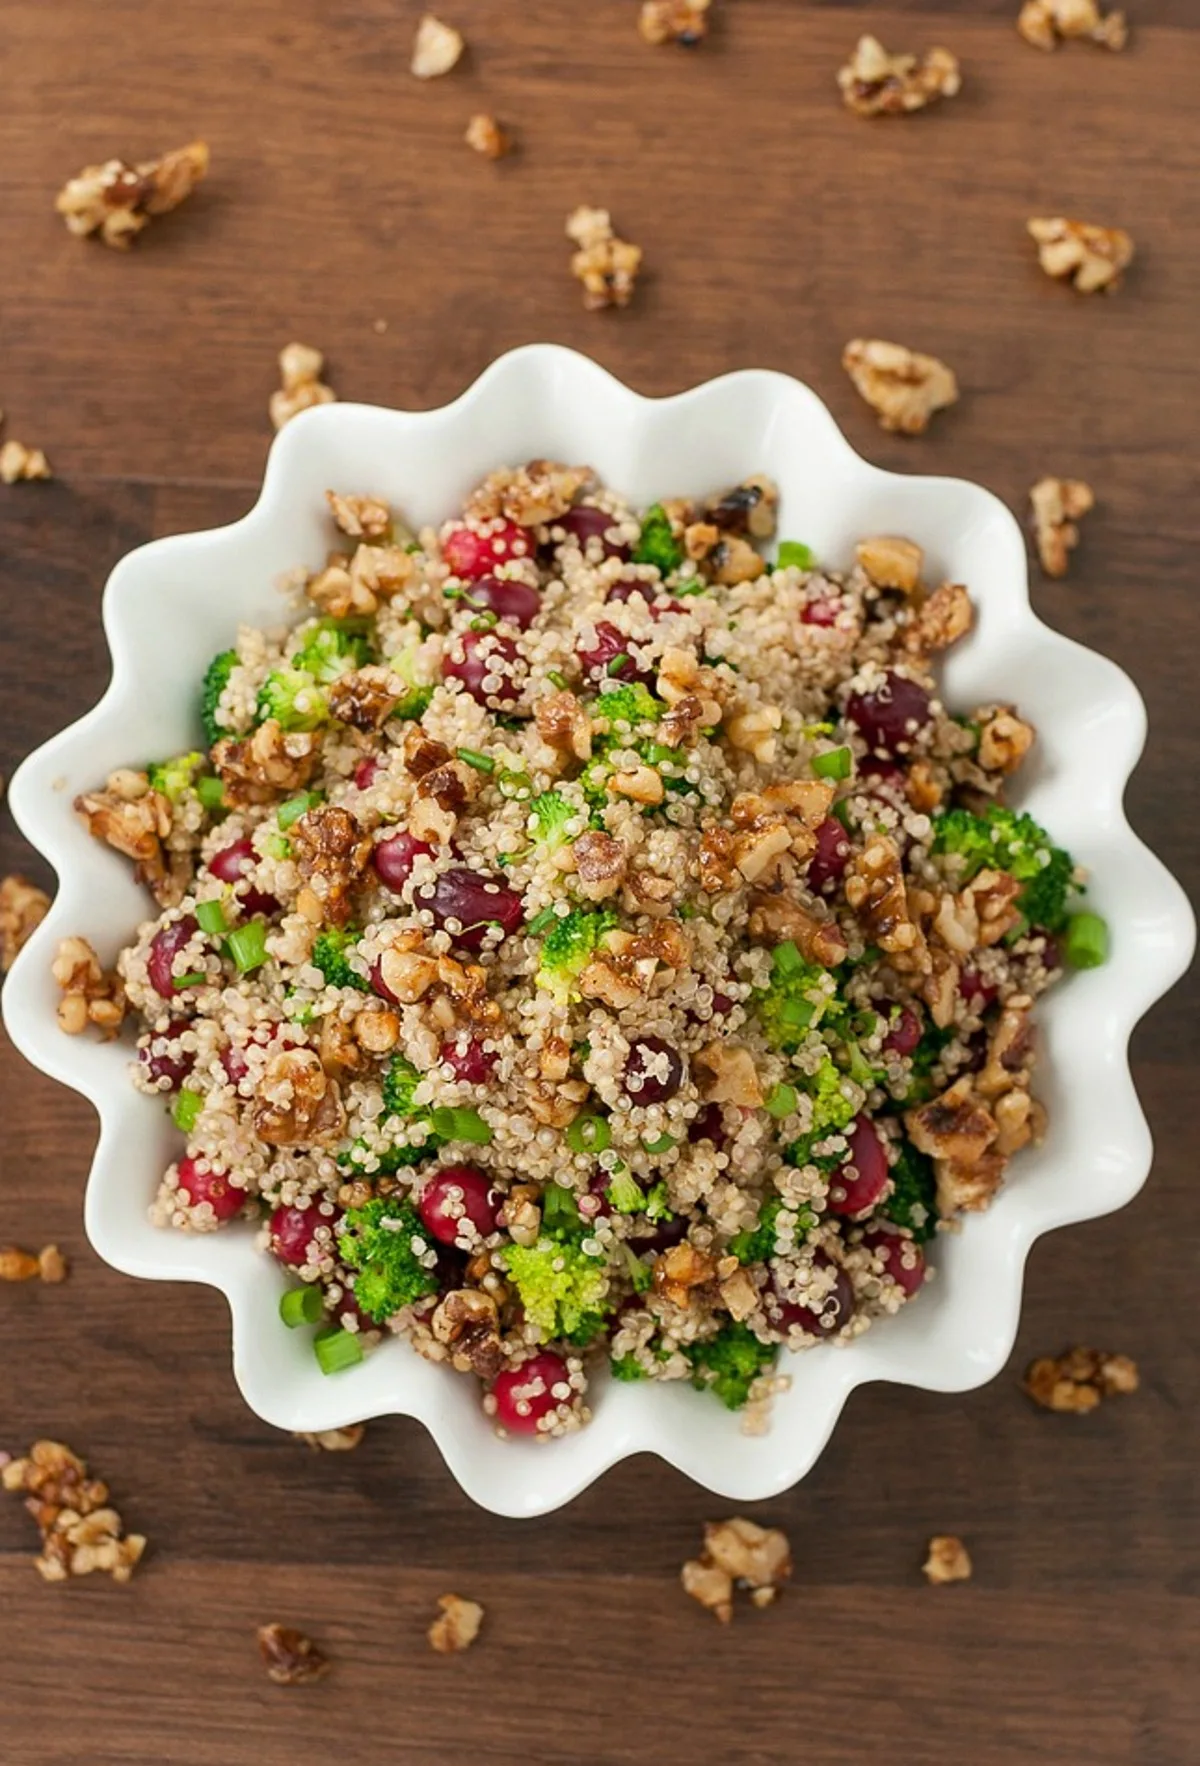 CRANBERRY QUINOA SALAD WITH CANDIED WALNUTS